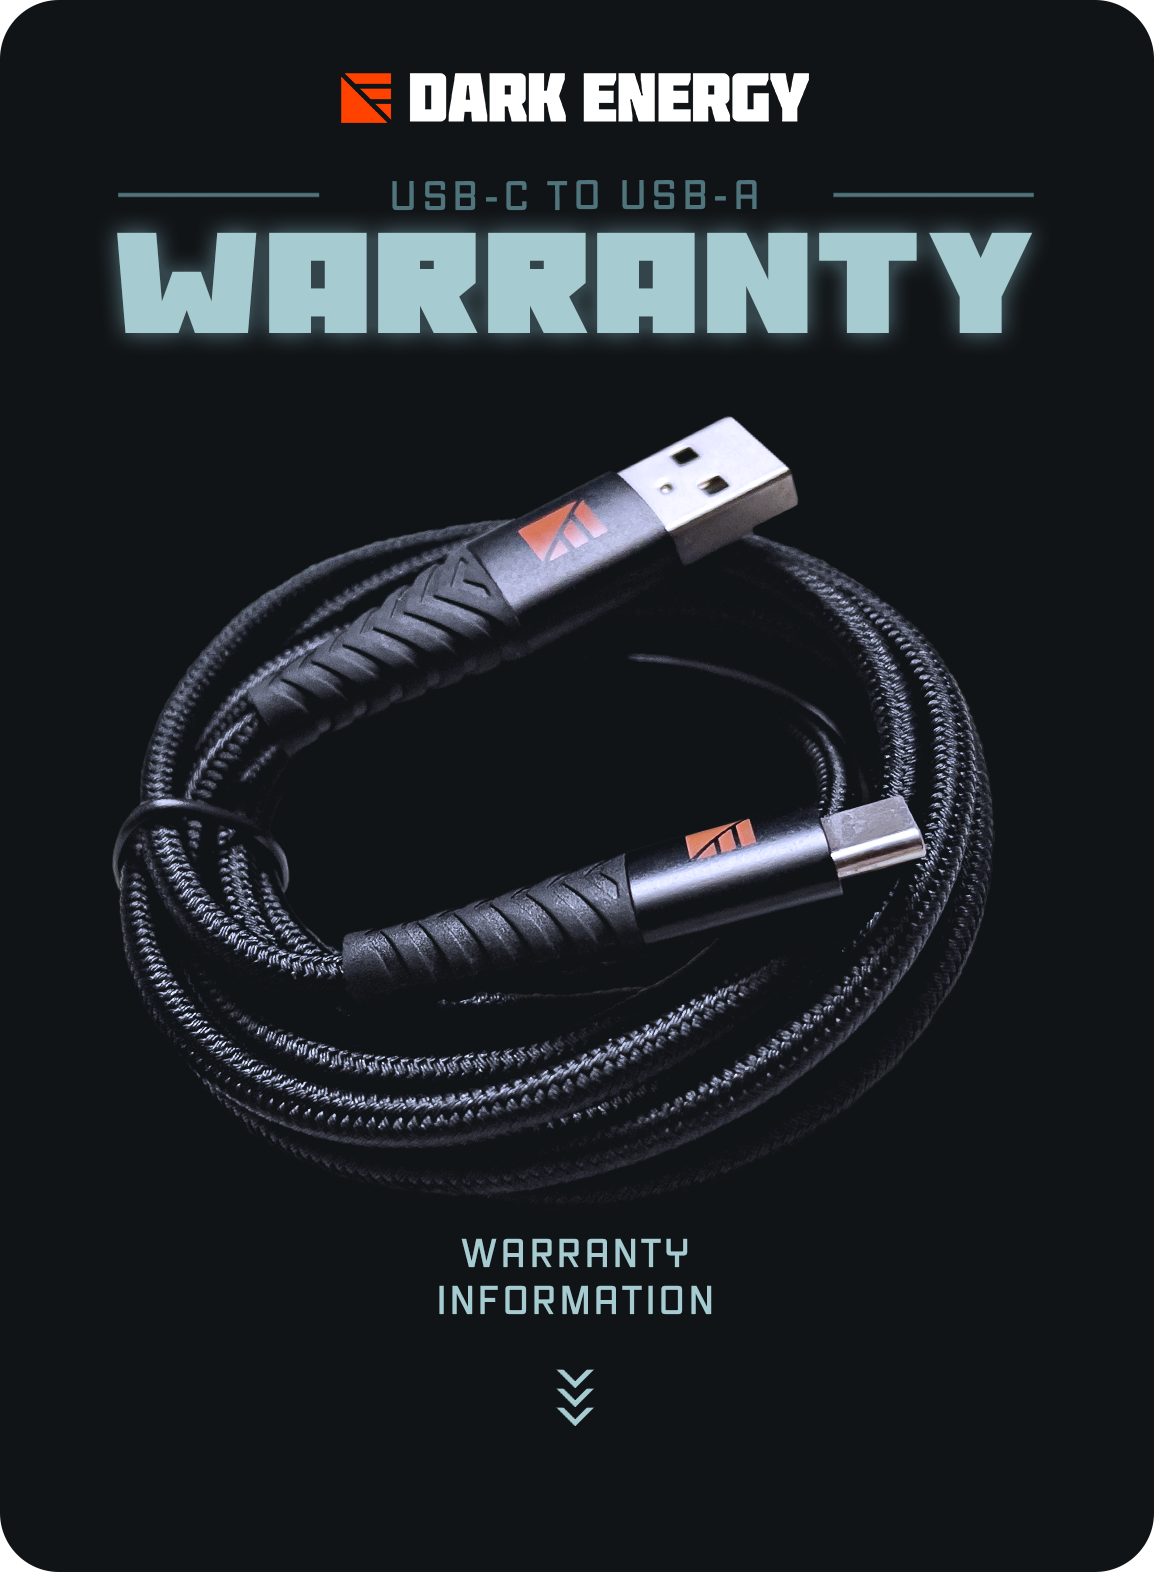 Warranty info reguarding the USB-C to USB-A cable.